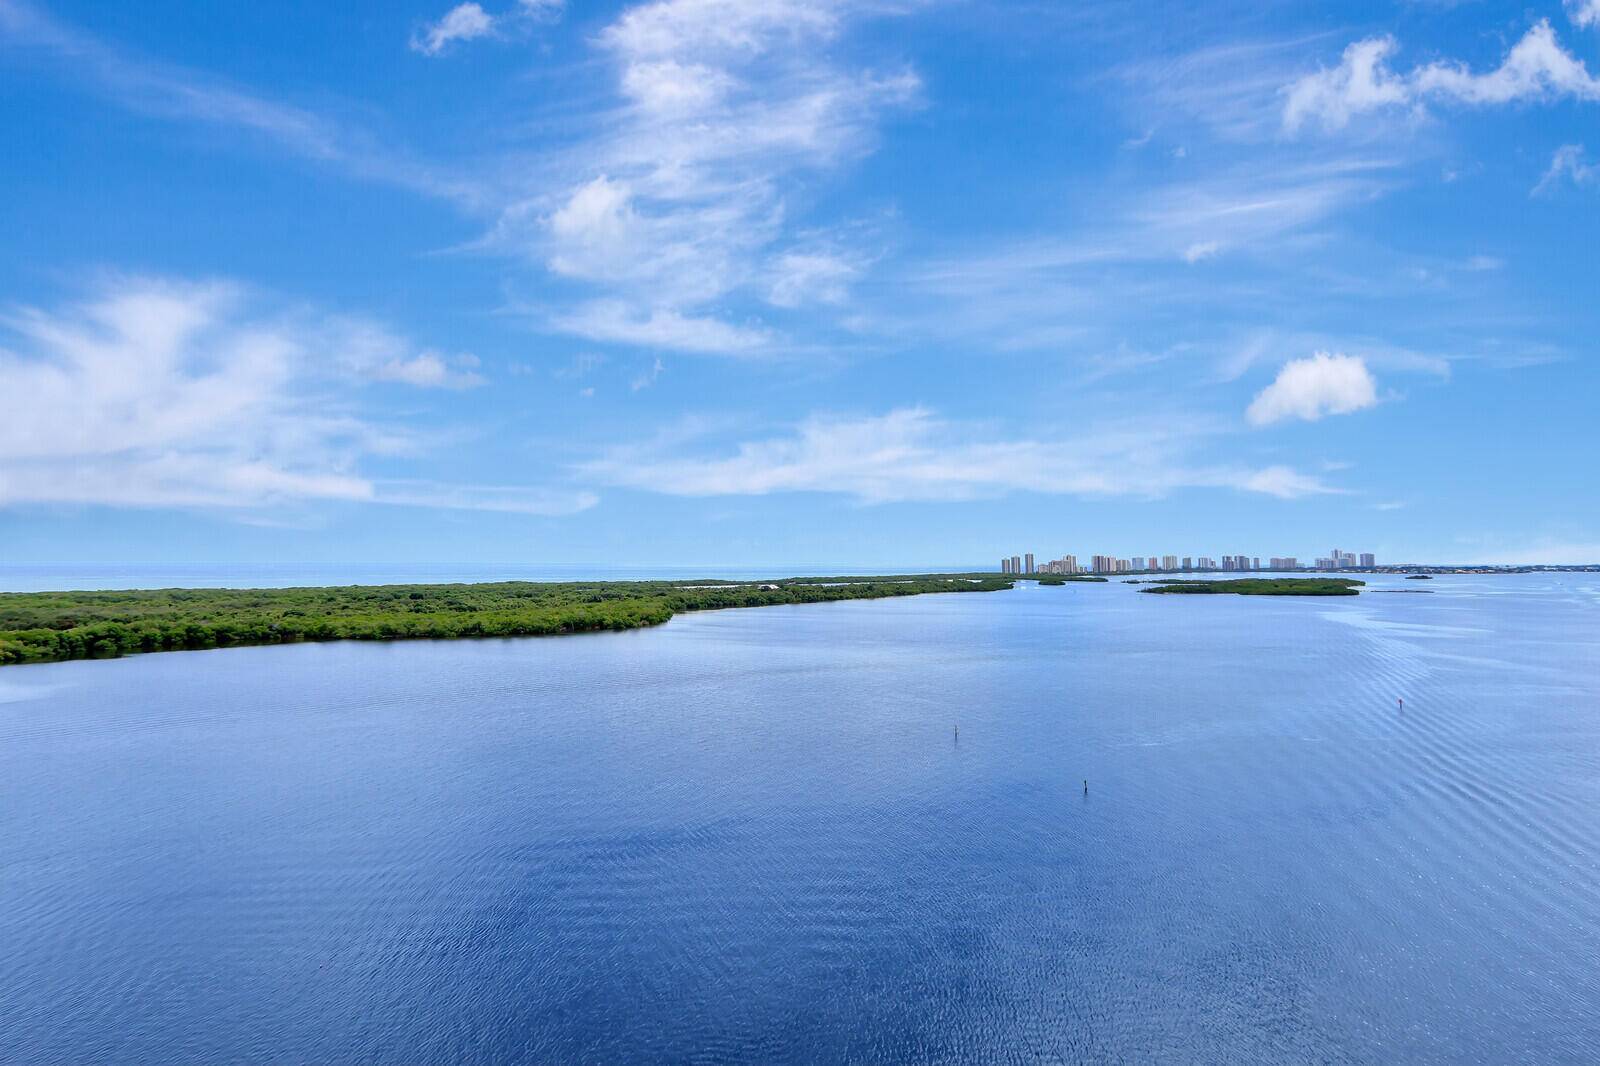 Gorgeous unobstructed SE views of the wide intracoastal waterway and ocean.